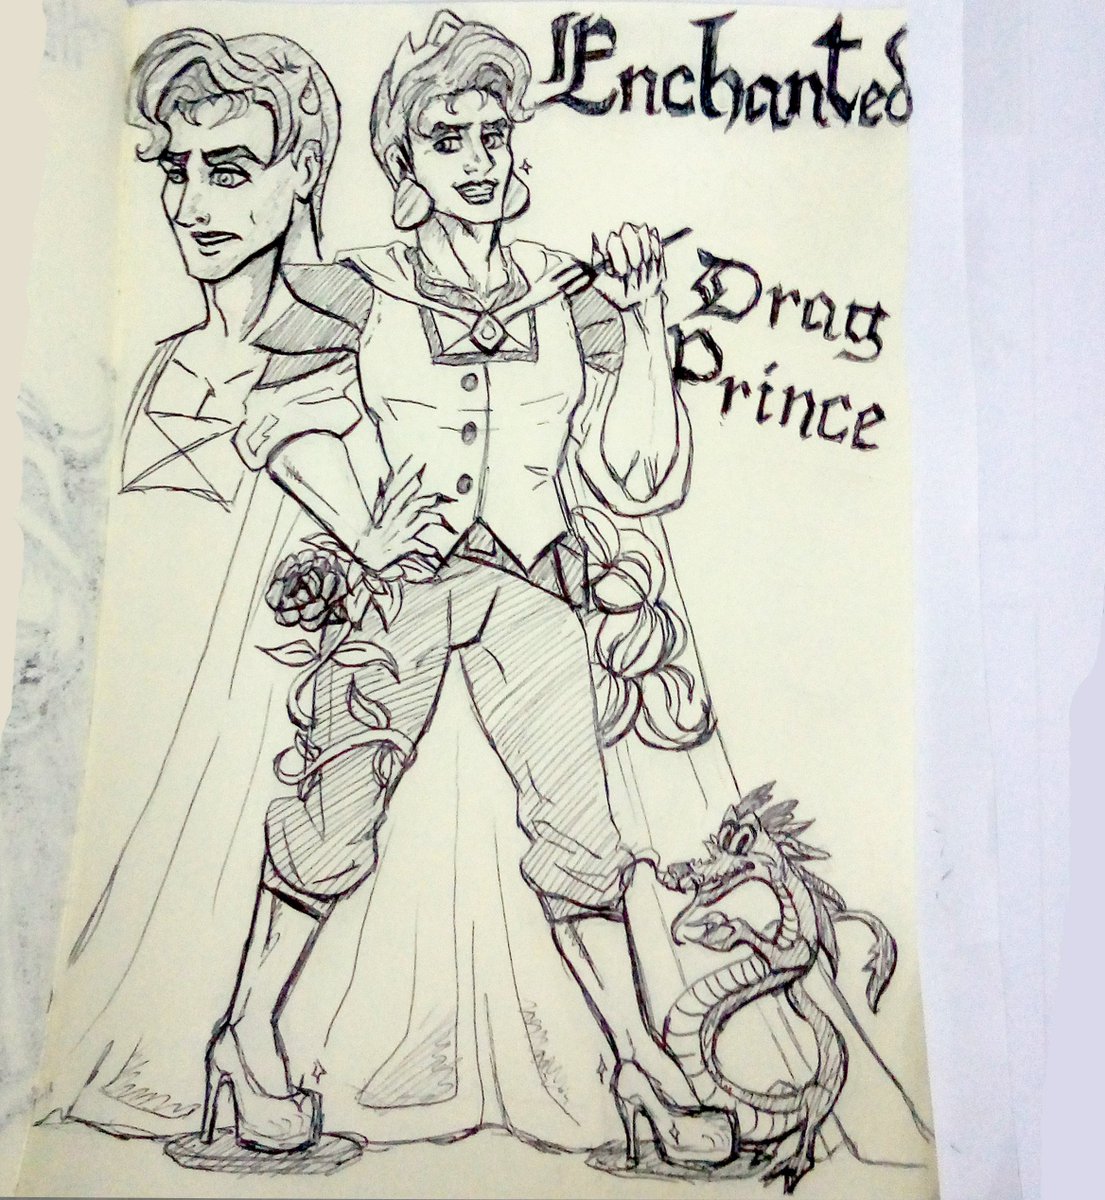 My OC and comic star, the *Drag Prince*

Coming soon.

#inktober #inktoberday7 #inktober2019 #inktober2019day7  #OC #dragprince  #traditional #traditionalart